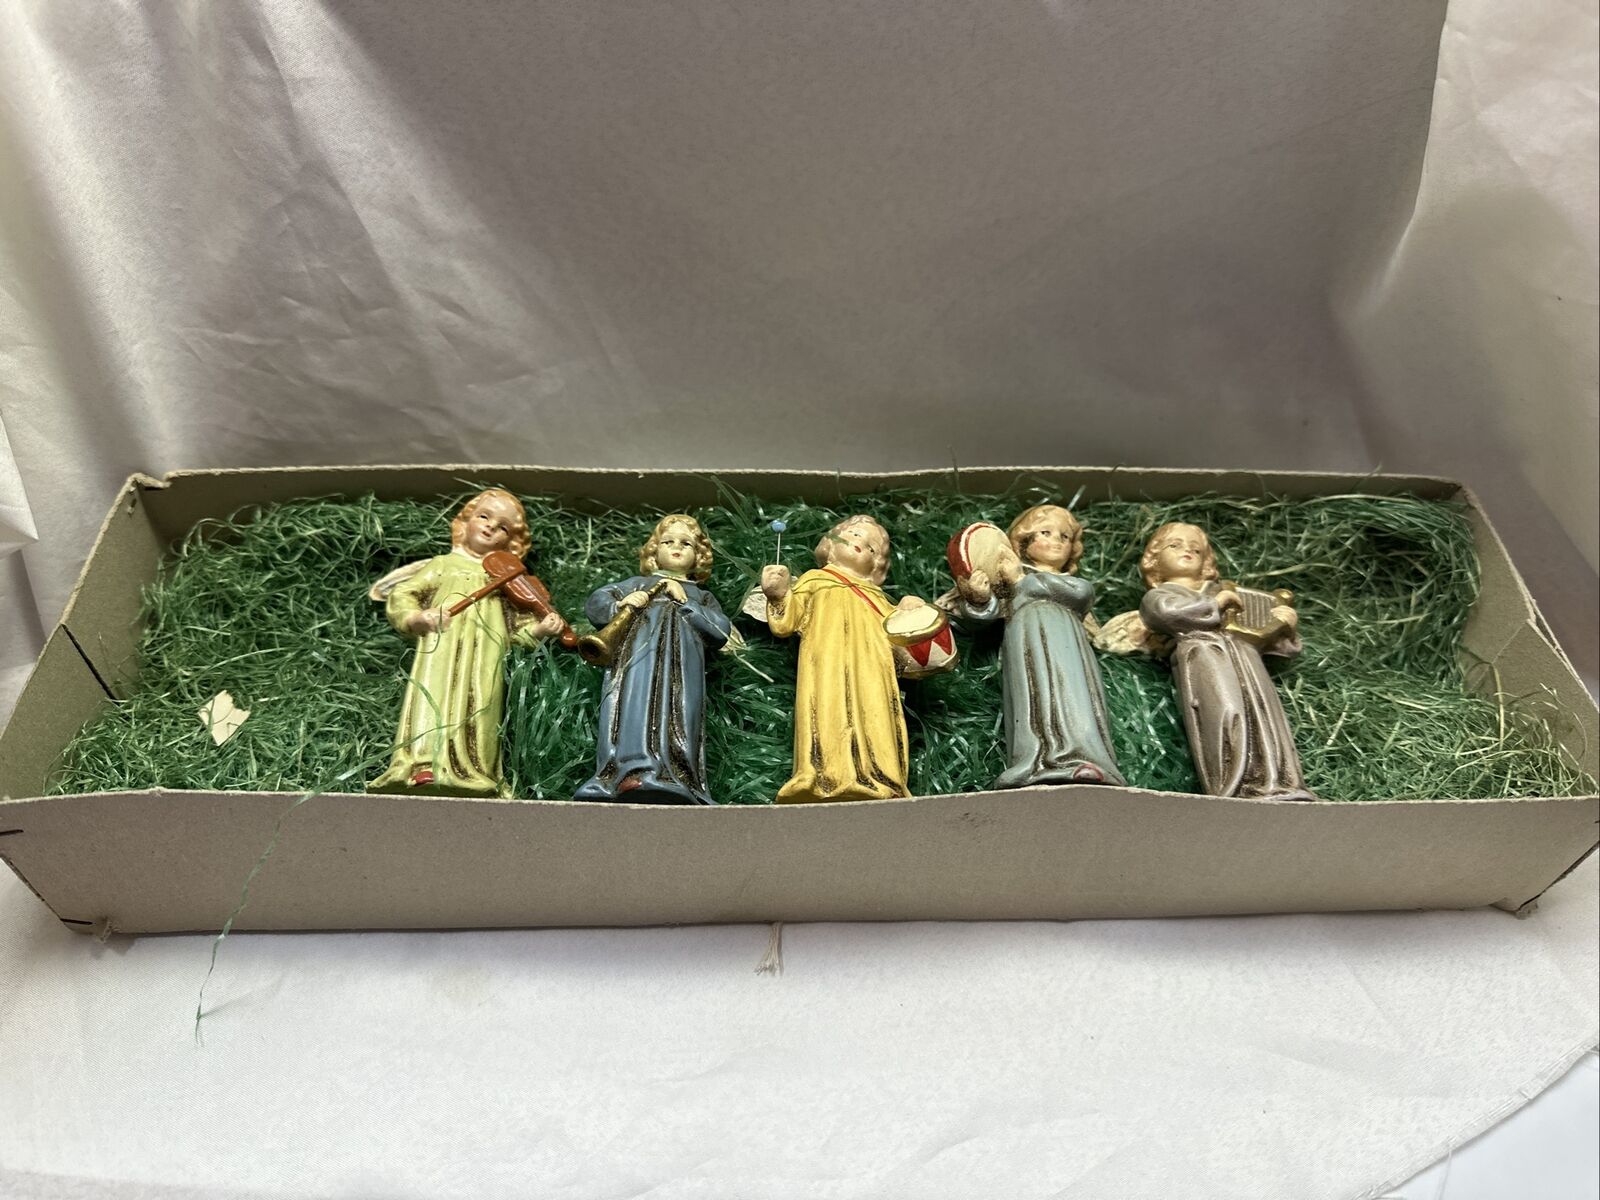 VTG 1940’s SET OF 5 COMPOSITION ANGELS CHRISTMAS ORNAMENTS W. GERMANY US ZONE